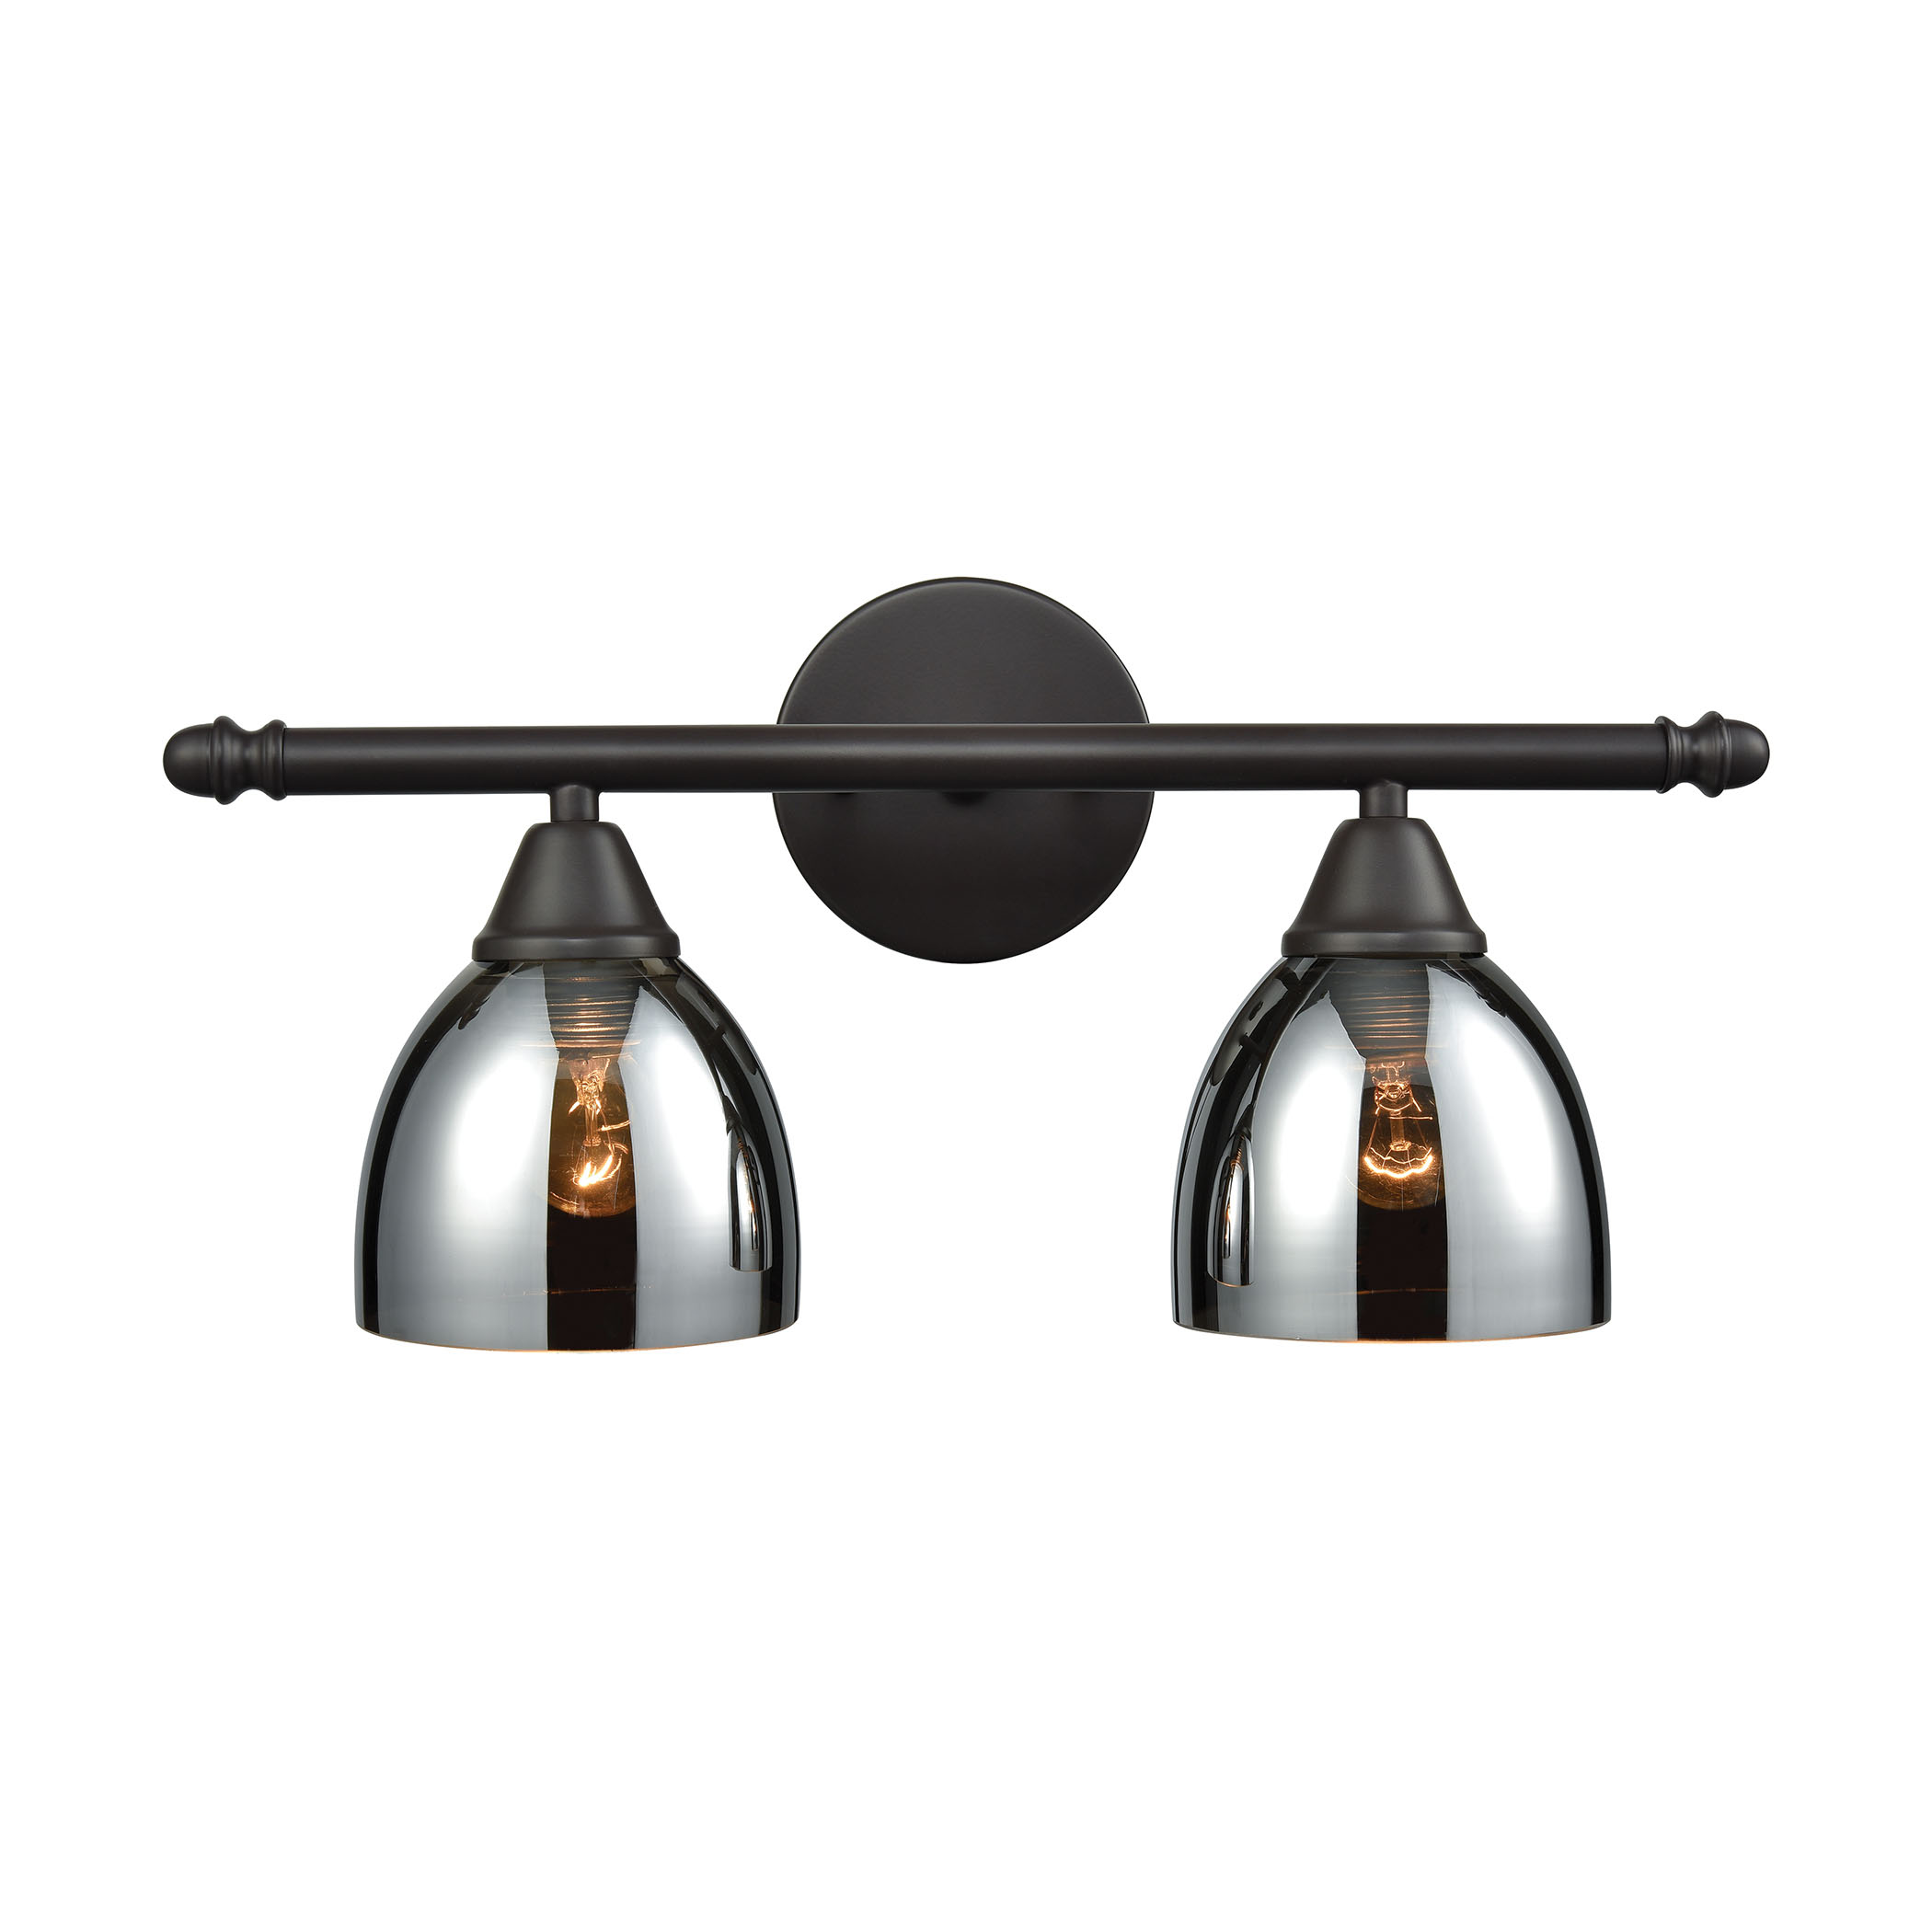 Reflections 2 Light Vanity in Oil Rubbed Bronze with Chrome Plated Glass